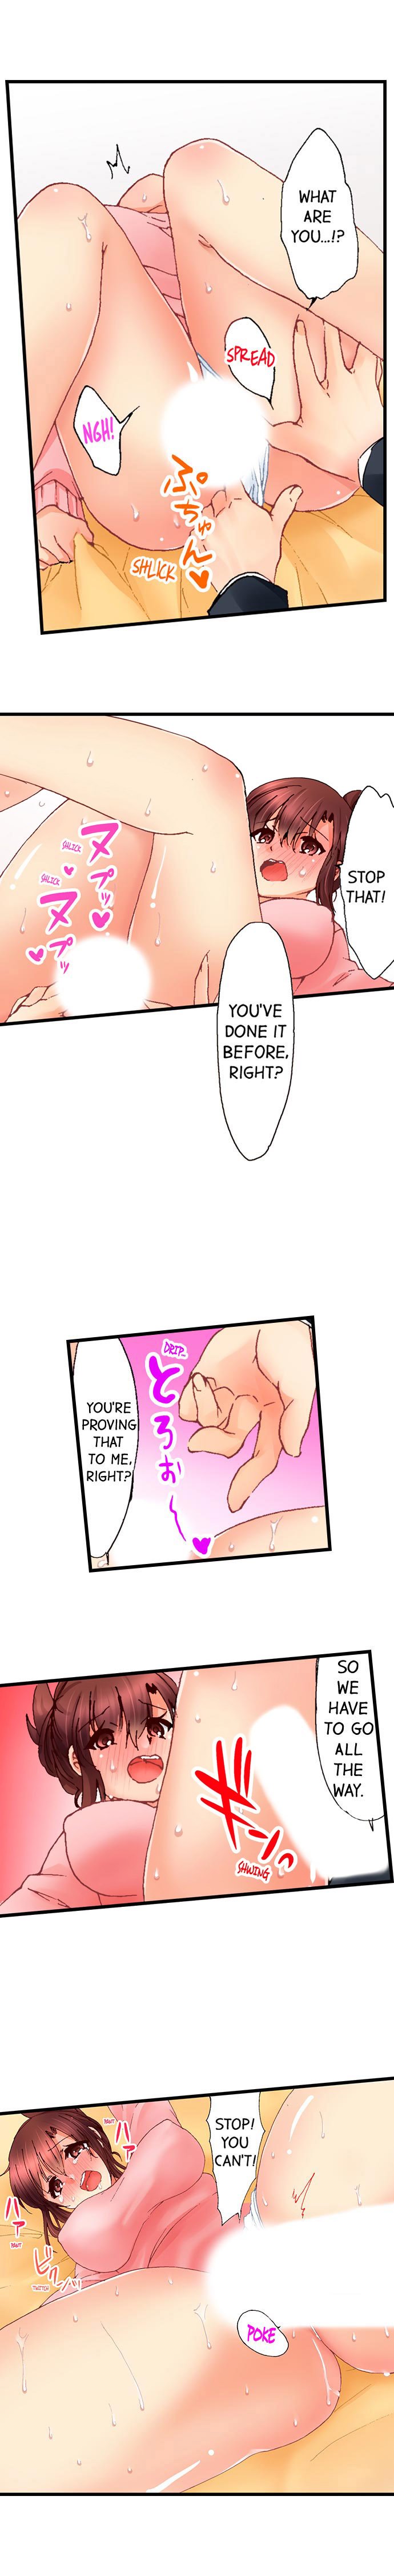 touching-my-older-sister-under-the-table-chap-3-8